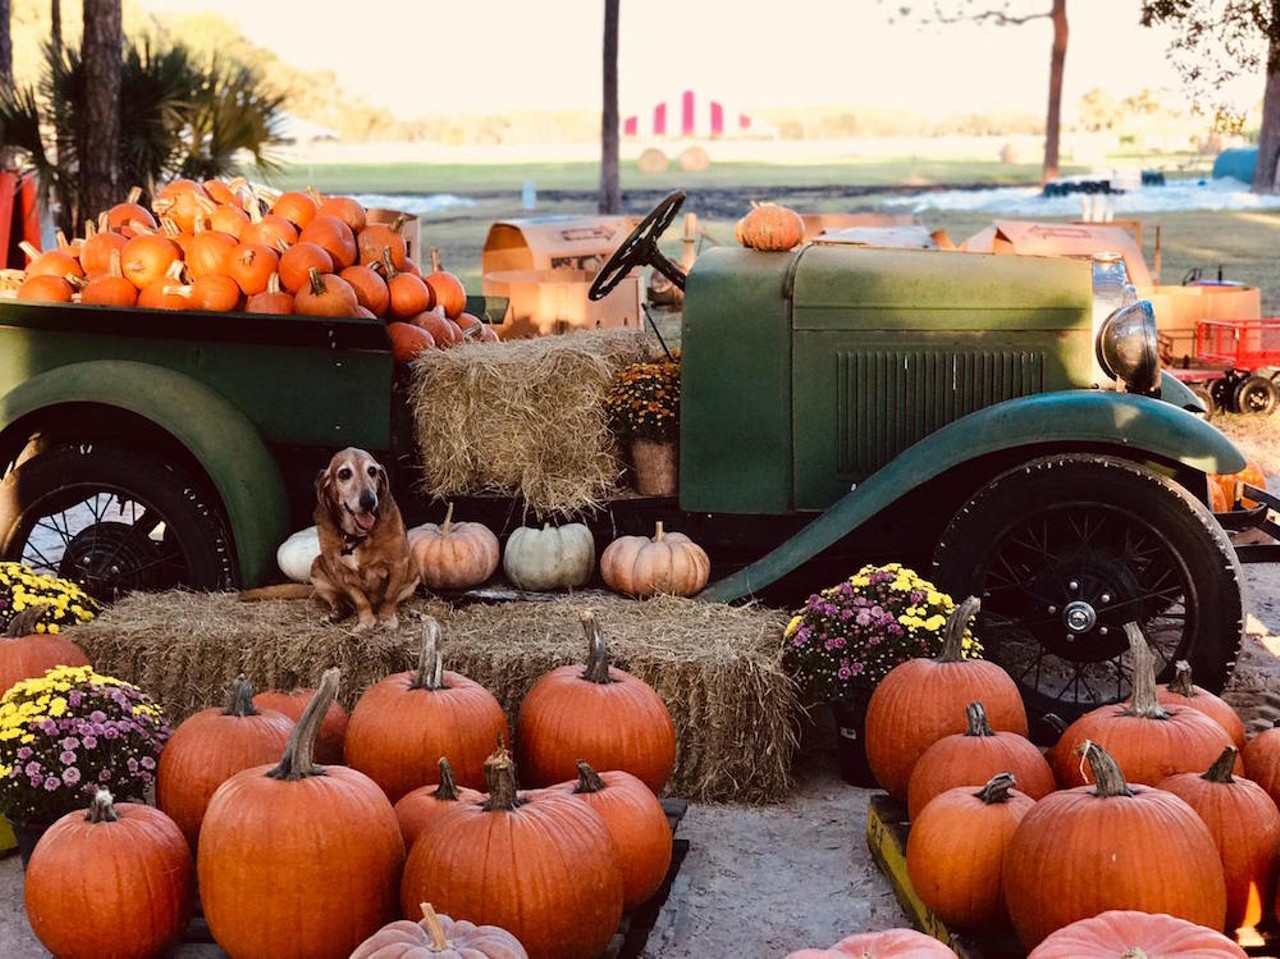 20 Orlando area corn mazes and pumpkin patches worth exploring this fall